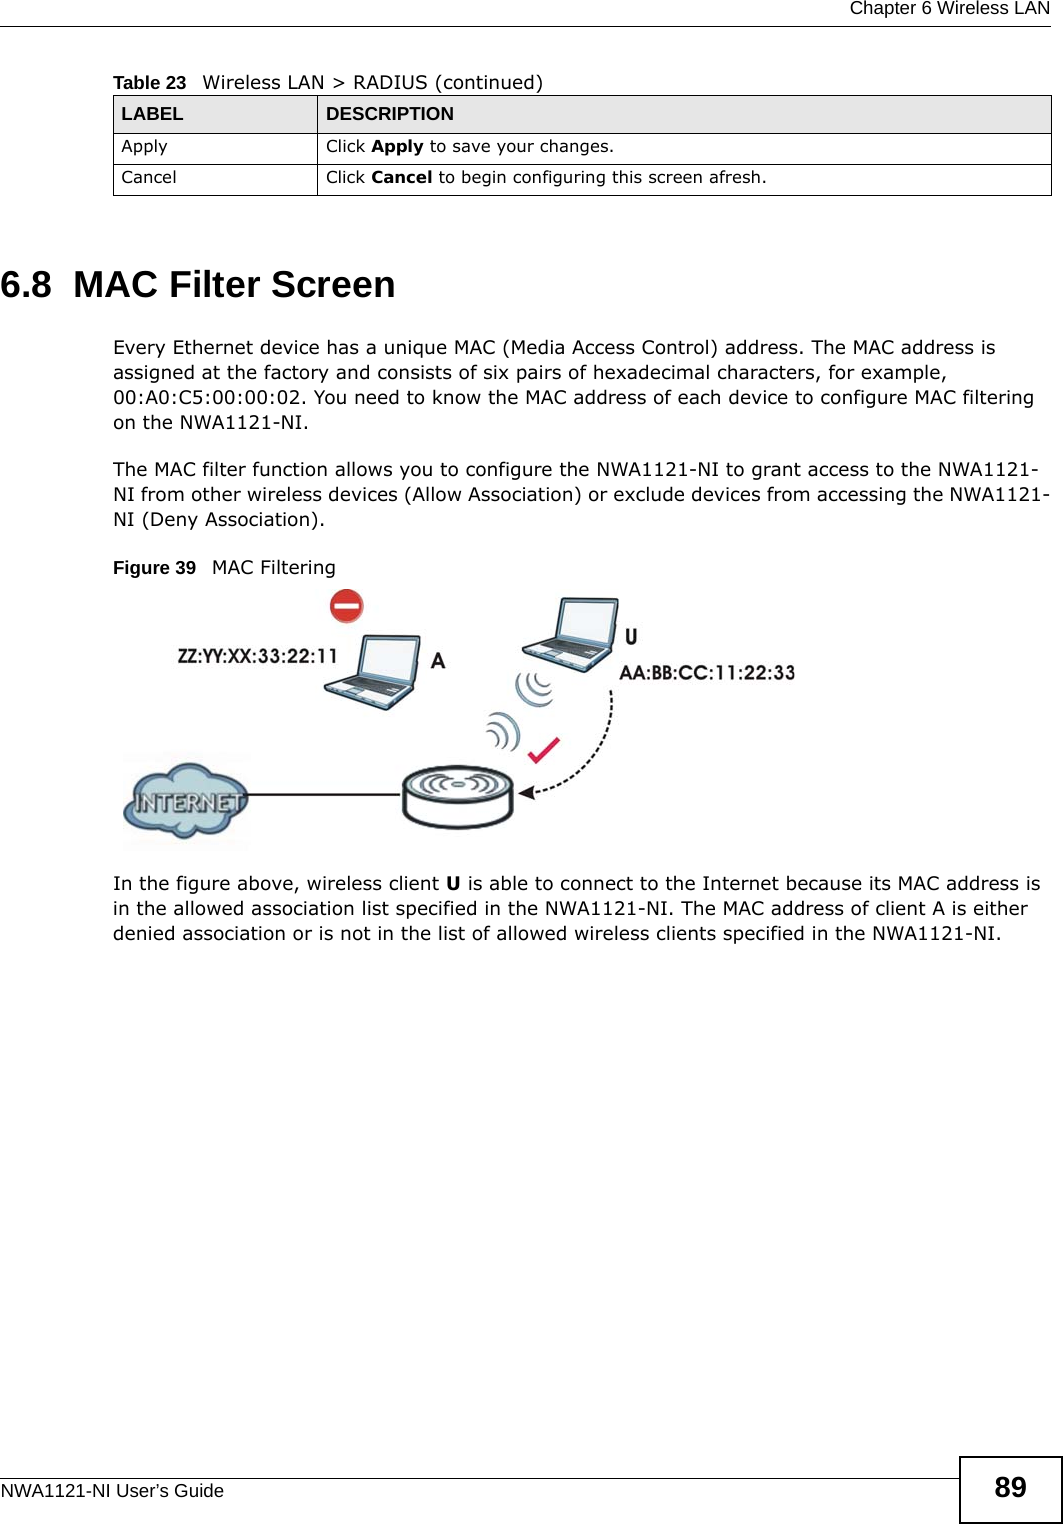  Chapter 6 Wireless LANNWA1121-NI User’s Guide 896.8  MAC Filter ScreenEvery Ethernet device has a unique MAC (Media Access Control) address. The MAC address is assigned at the factory and consists of six pairs of hexadecimal characters, for example, 00:A0:C5:00:00:02. You need to know the MAC address of each device to configure MAC filtering on the NWA1121-NI.The MAC filter function allows you to configure the NWA1121-NI to grant access to the NWA1121-NI from other wireless devices (Allow Association) or exclude devices from accessing the NWA1121-NI (Deny Association). Figure 39   MAC Filtering In the figure above, wireless client U is able to connect to the Internet because its MAC address is in the allowed association list specified in the NWA1121-NI. The MAC address of client A is either denied association or is not in the list of allowed wireless clients specified in the NWA1121-NI.Apply Click Apply to save your changes.Cancel Click Cancel to begin configuring this screen afresh.Table 23   Wireless LAN &gt; RADIUS (continued)LABEL DESCRIPTION